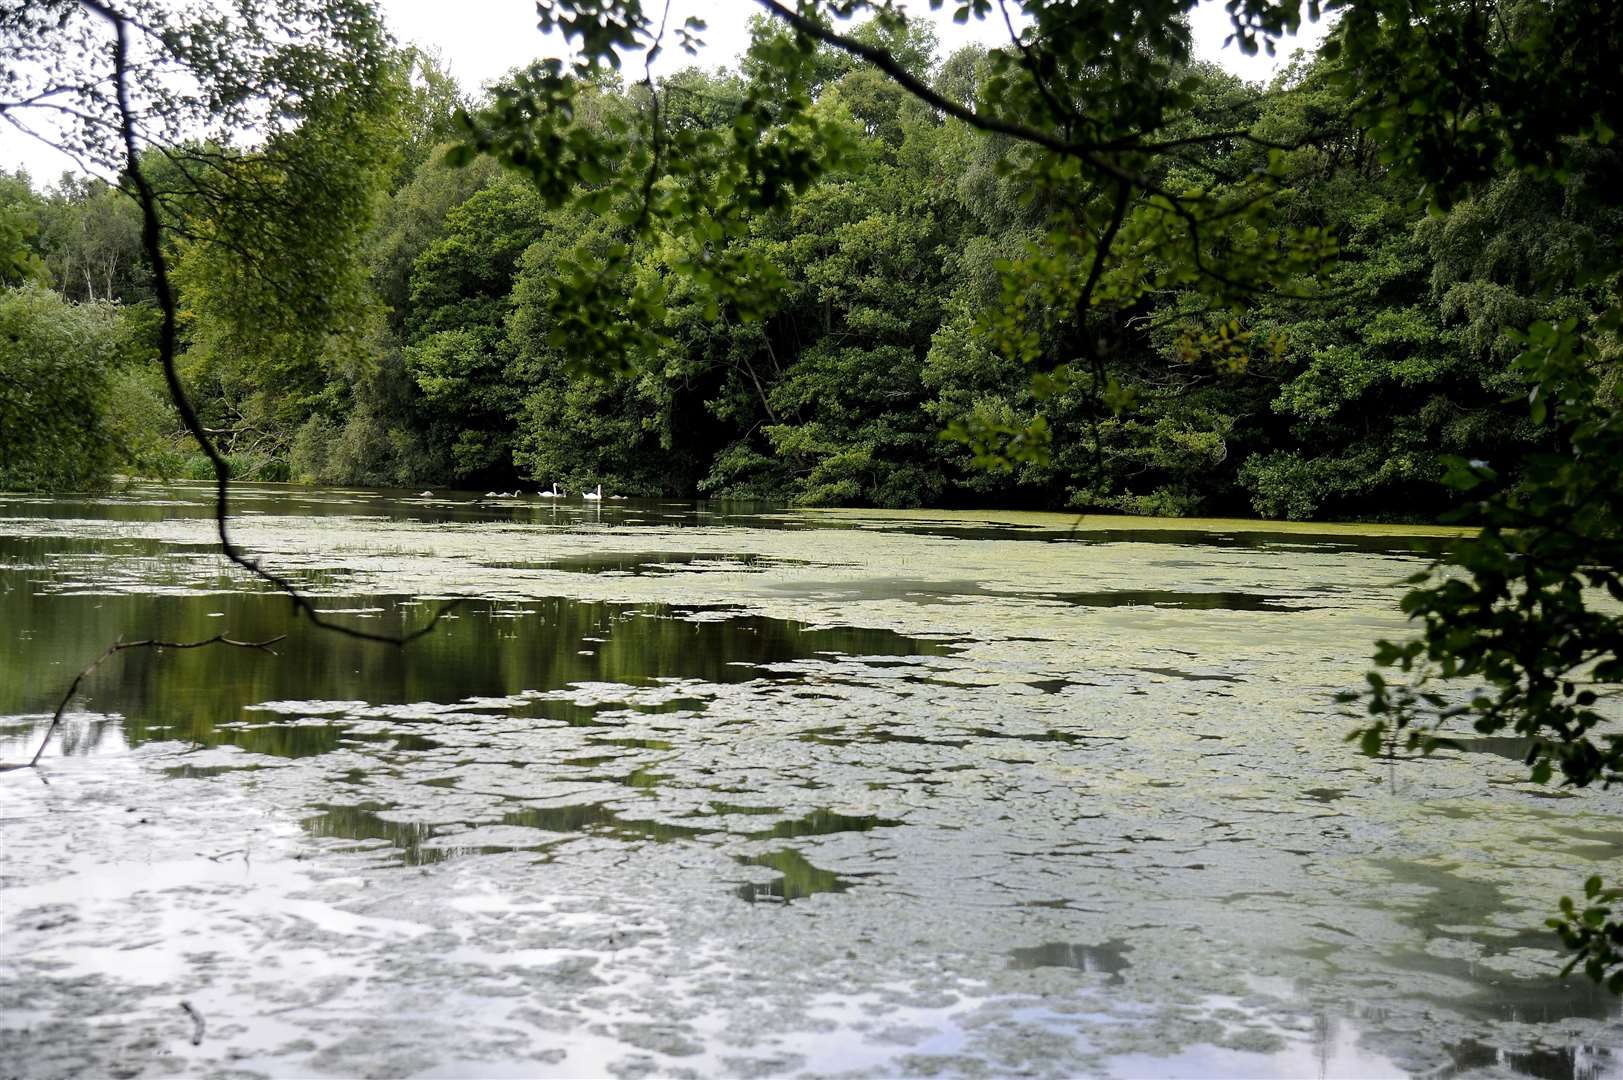 Brodie Castle’s ponds are thick with algae, which can cause issues for wildlife.